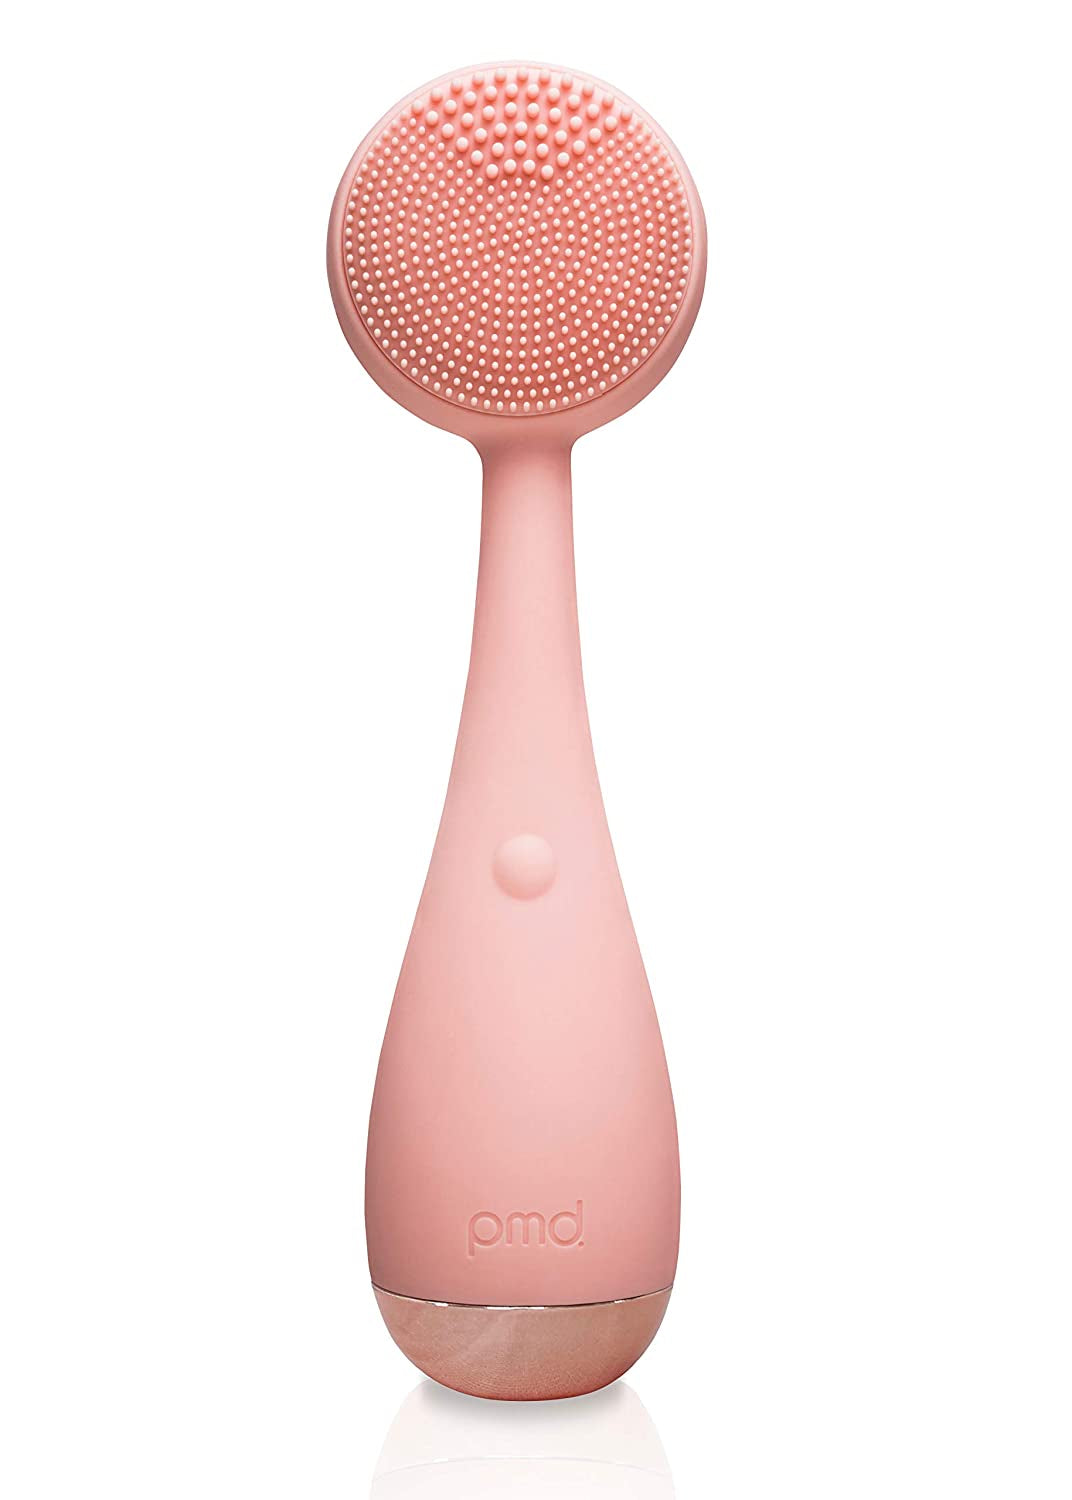 Clean - Smart Facial Cleansing Device with Silicone Brush & Anti-Aging Massager - Waterproof - Sonicglow Vibration Technology - Clear Pores and Blackheads - Lift, Firm, and Tone Skin